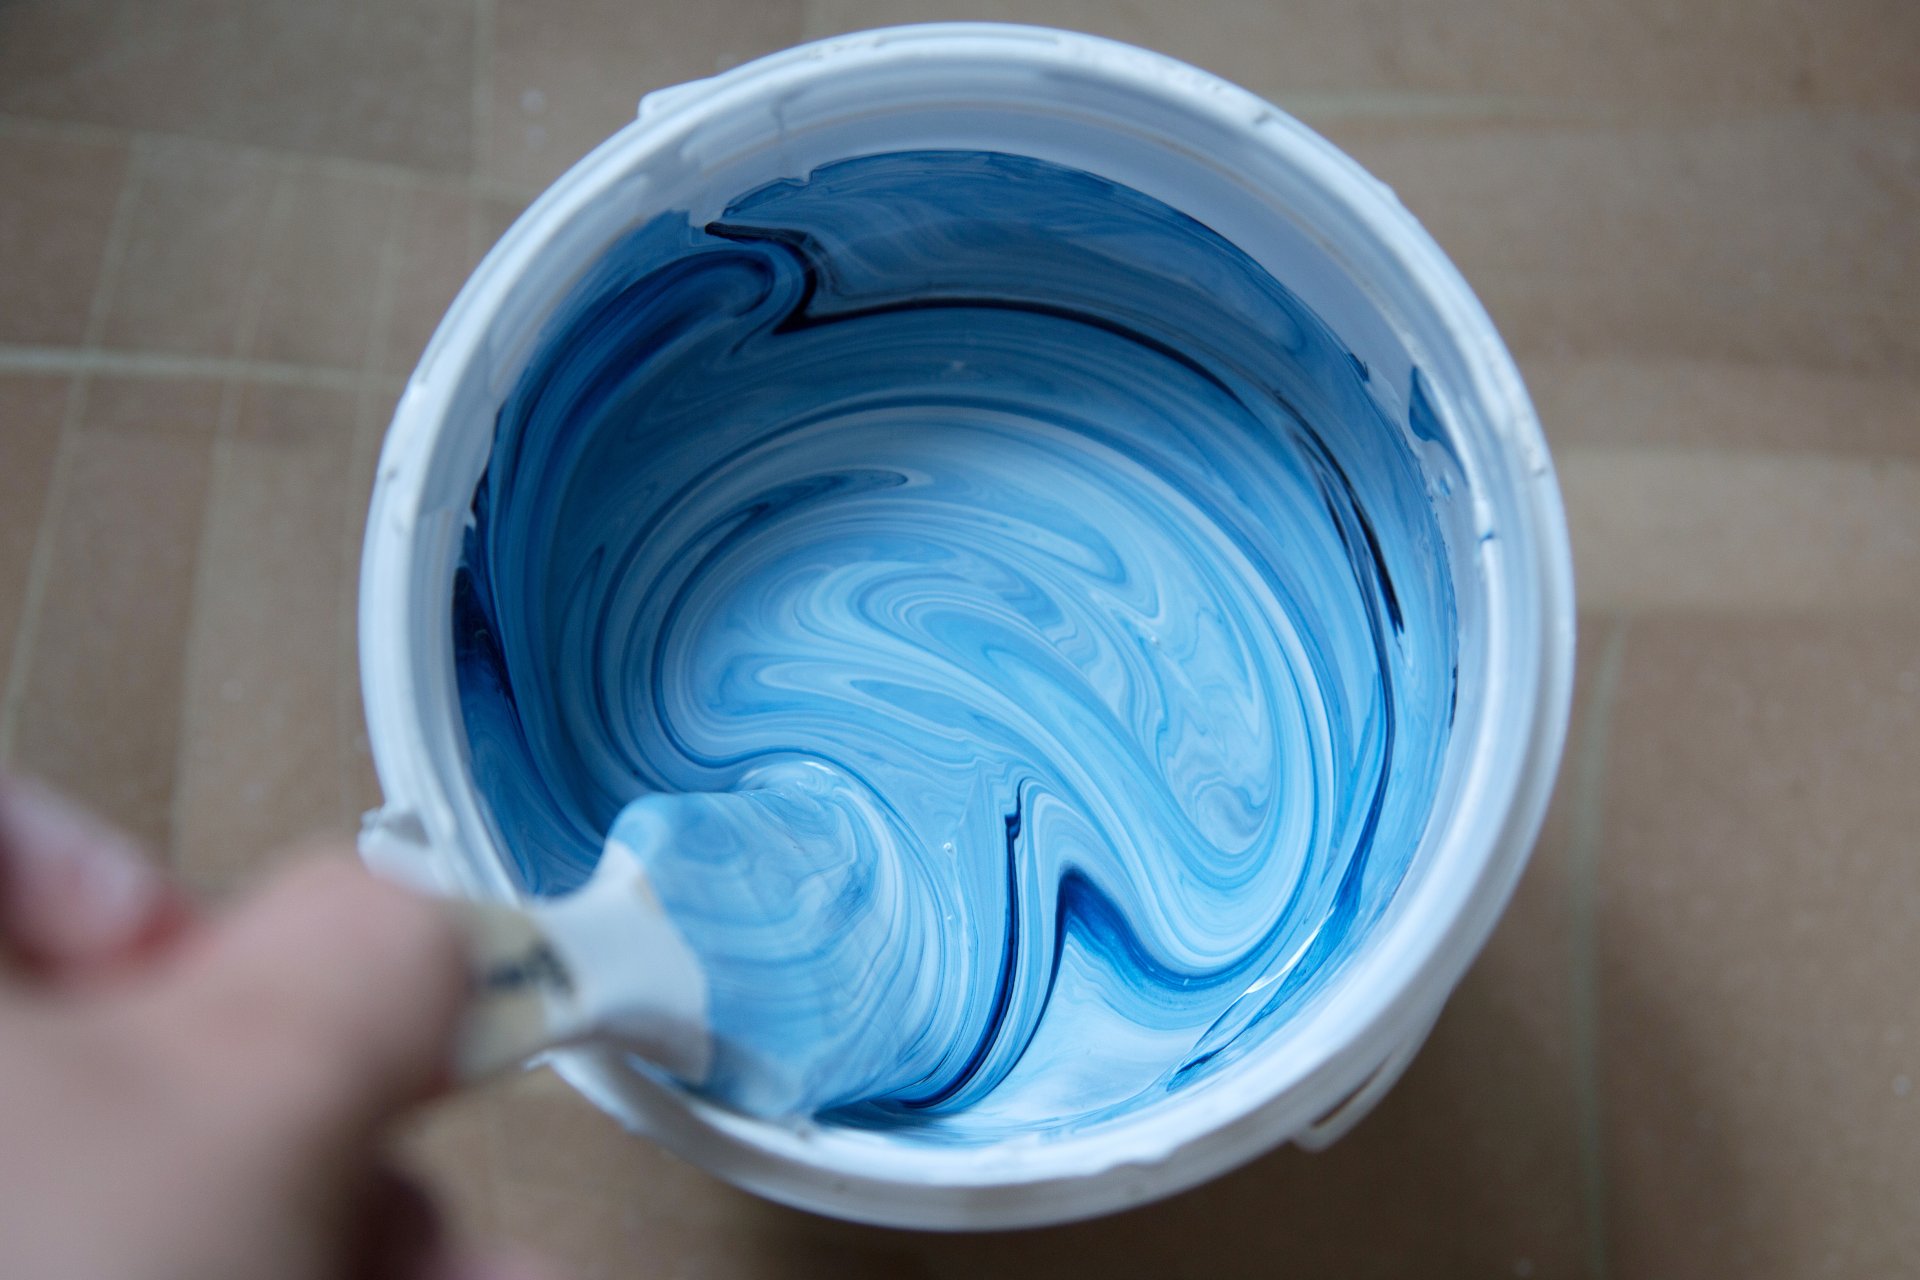 Top view of a can of mixed white and blue paint